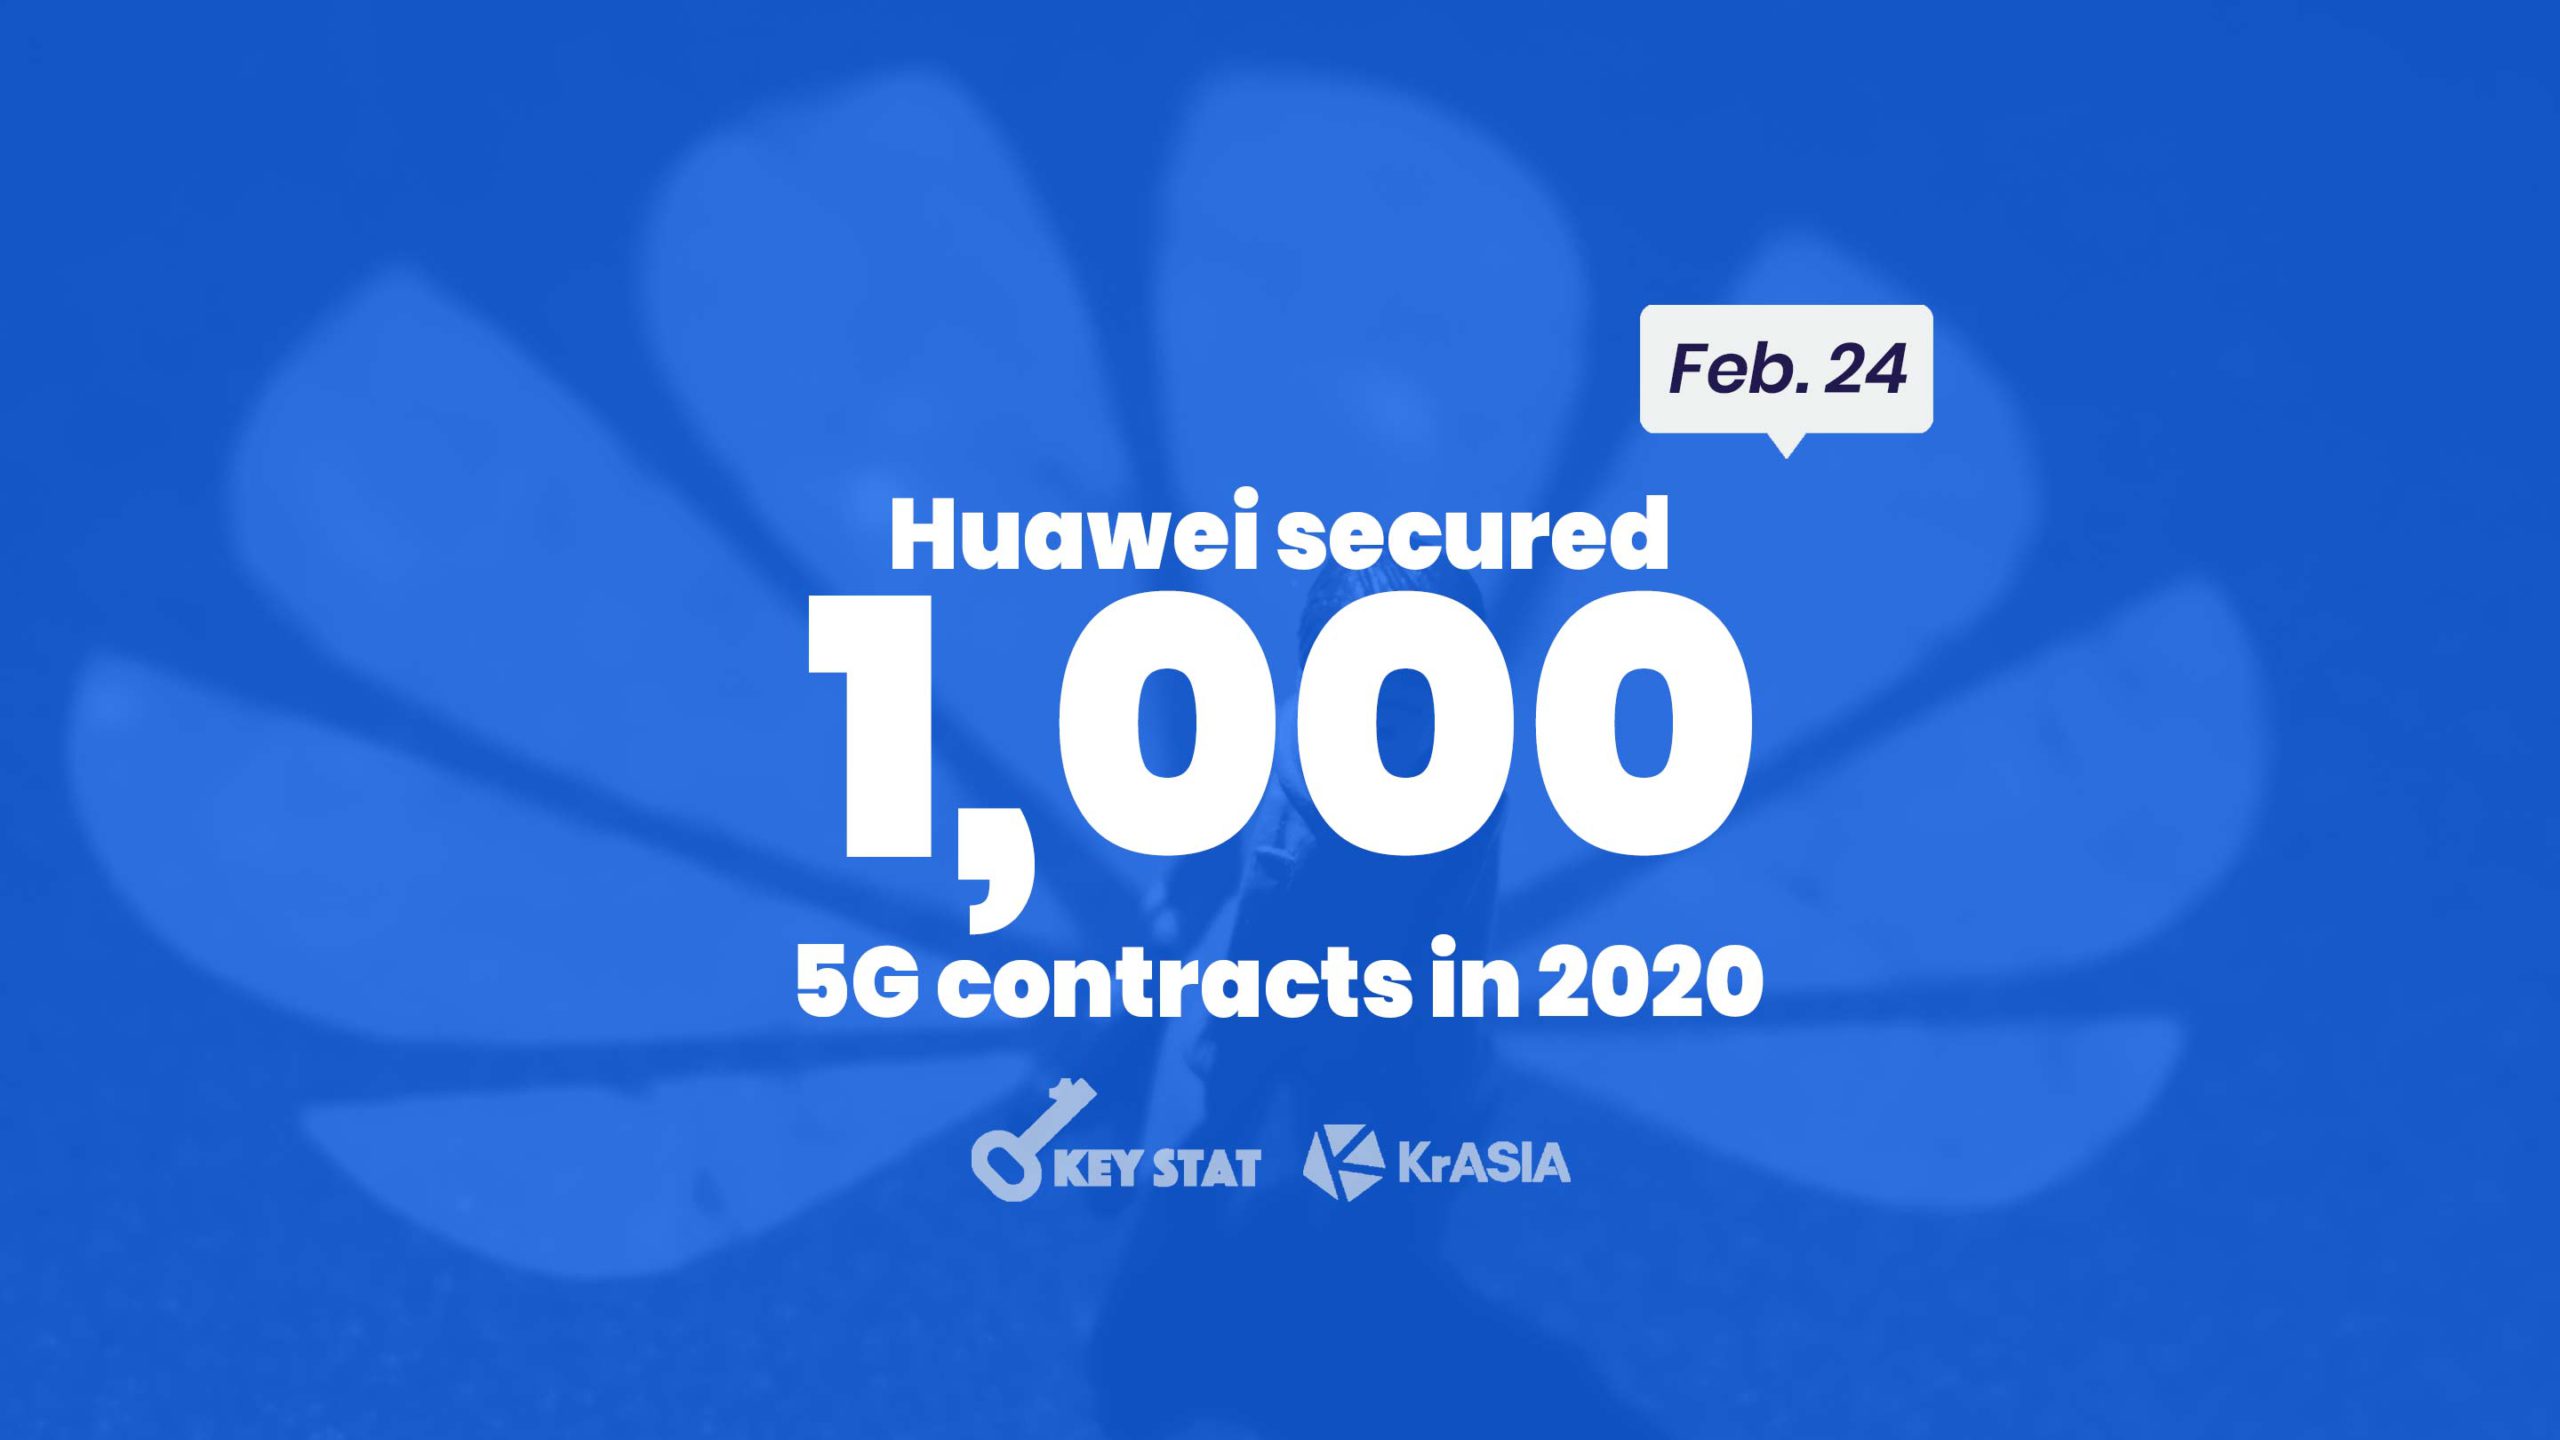 KEY STAT | Huawei keeps growing its 5G business in spite of sanctions